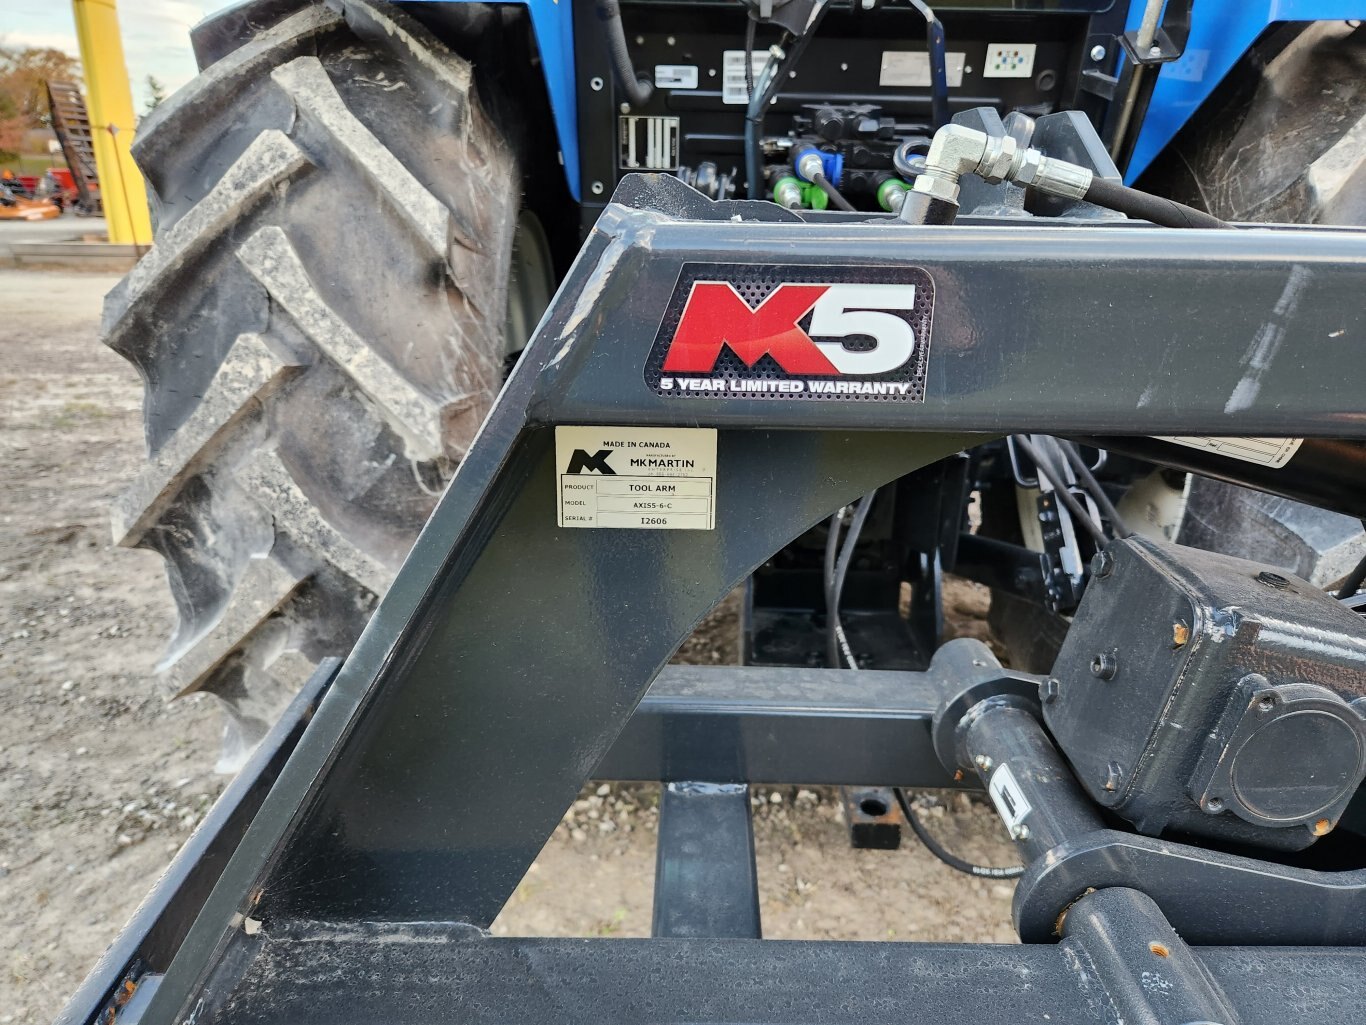 NEW Axis 5 6 Tool Arm